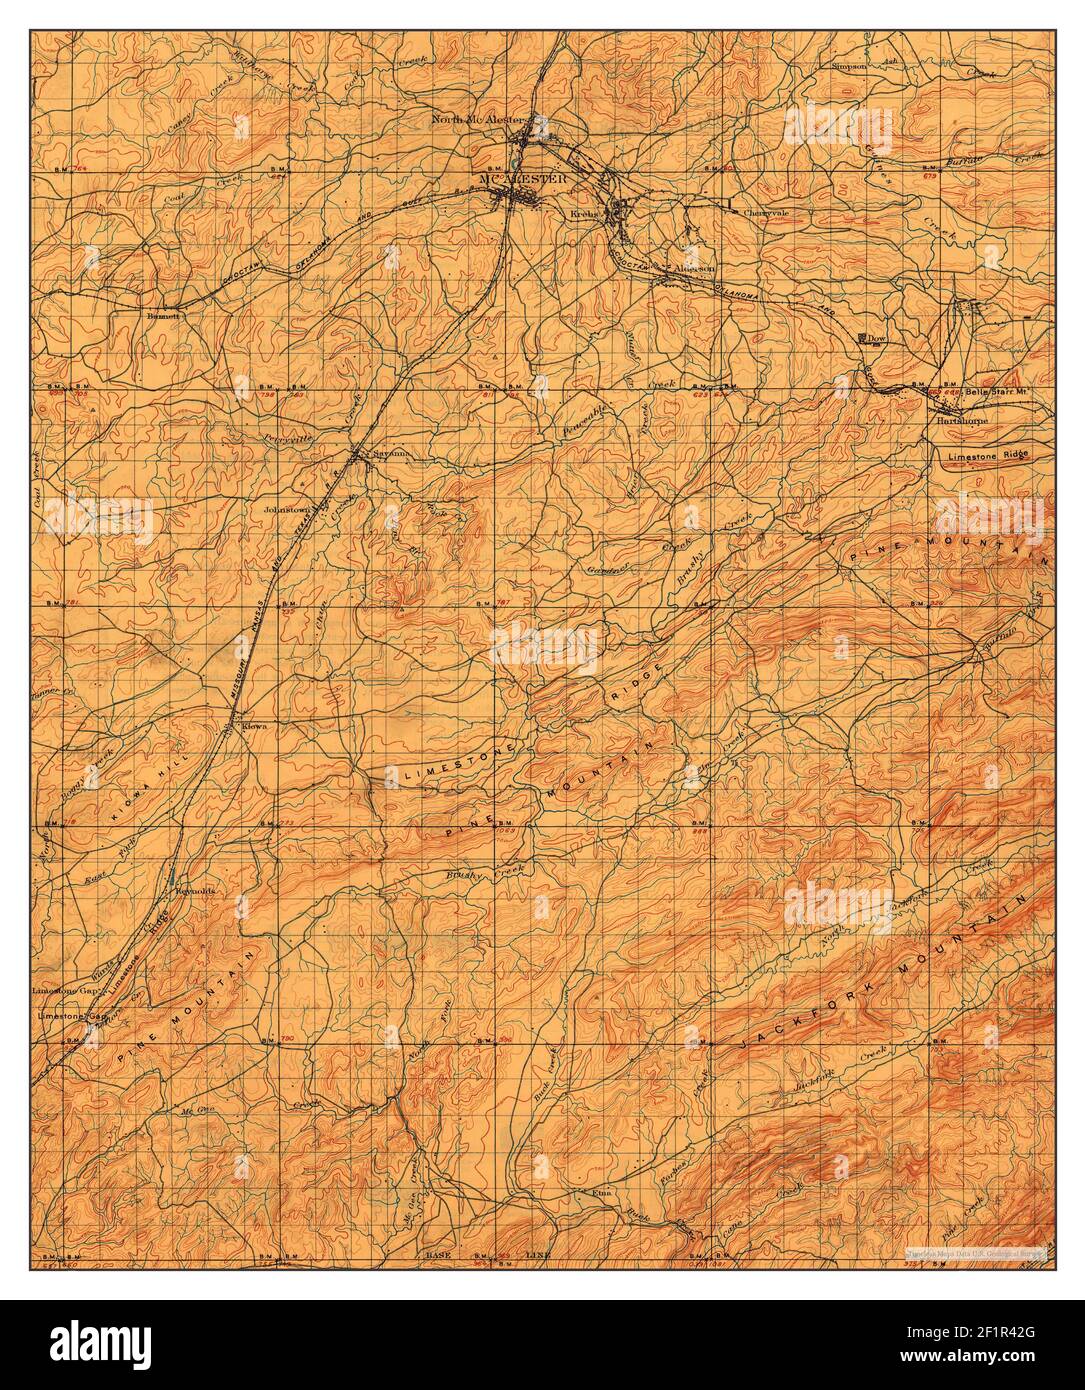 McAlester, Oklahoma, map 1898, 1:125000, United States of America by Timeless Maps, data U.S. Geological Survey Stock Photo